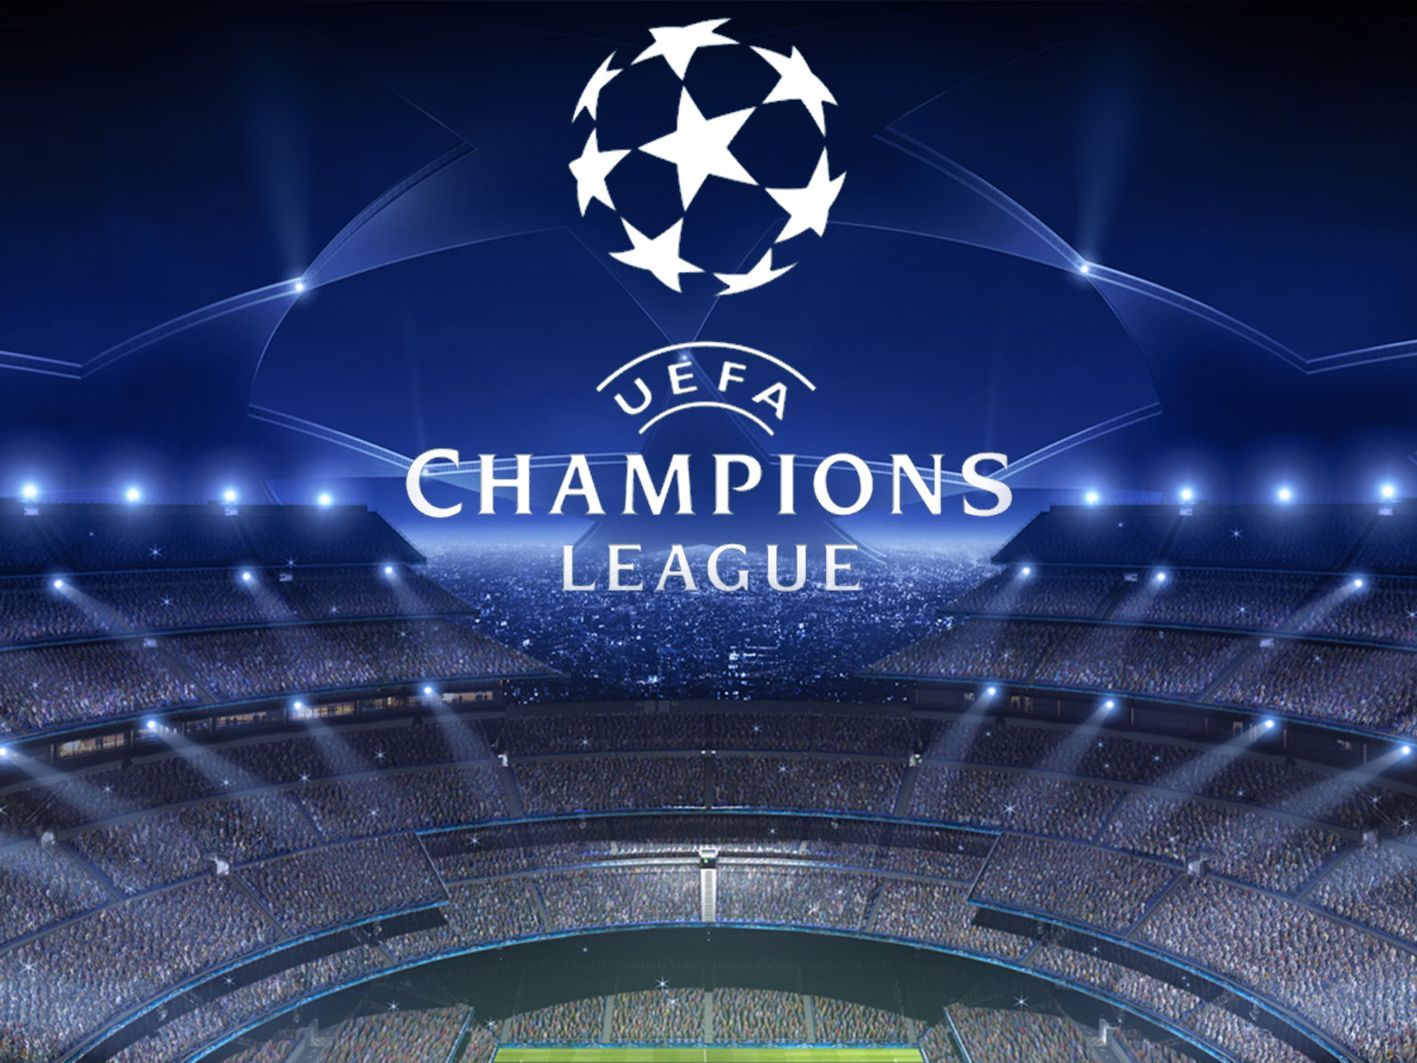 17492 Screensavers and Wallpapers Sports for phone. Download sports, background, logos, football, blue pictures for free